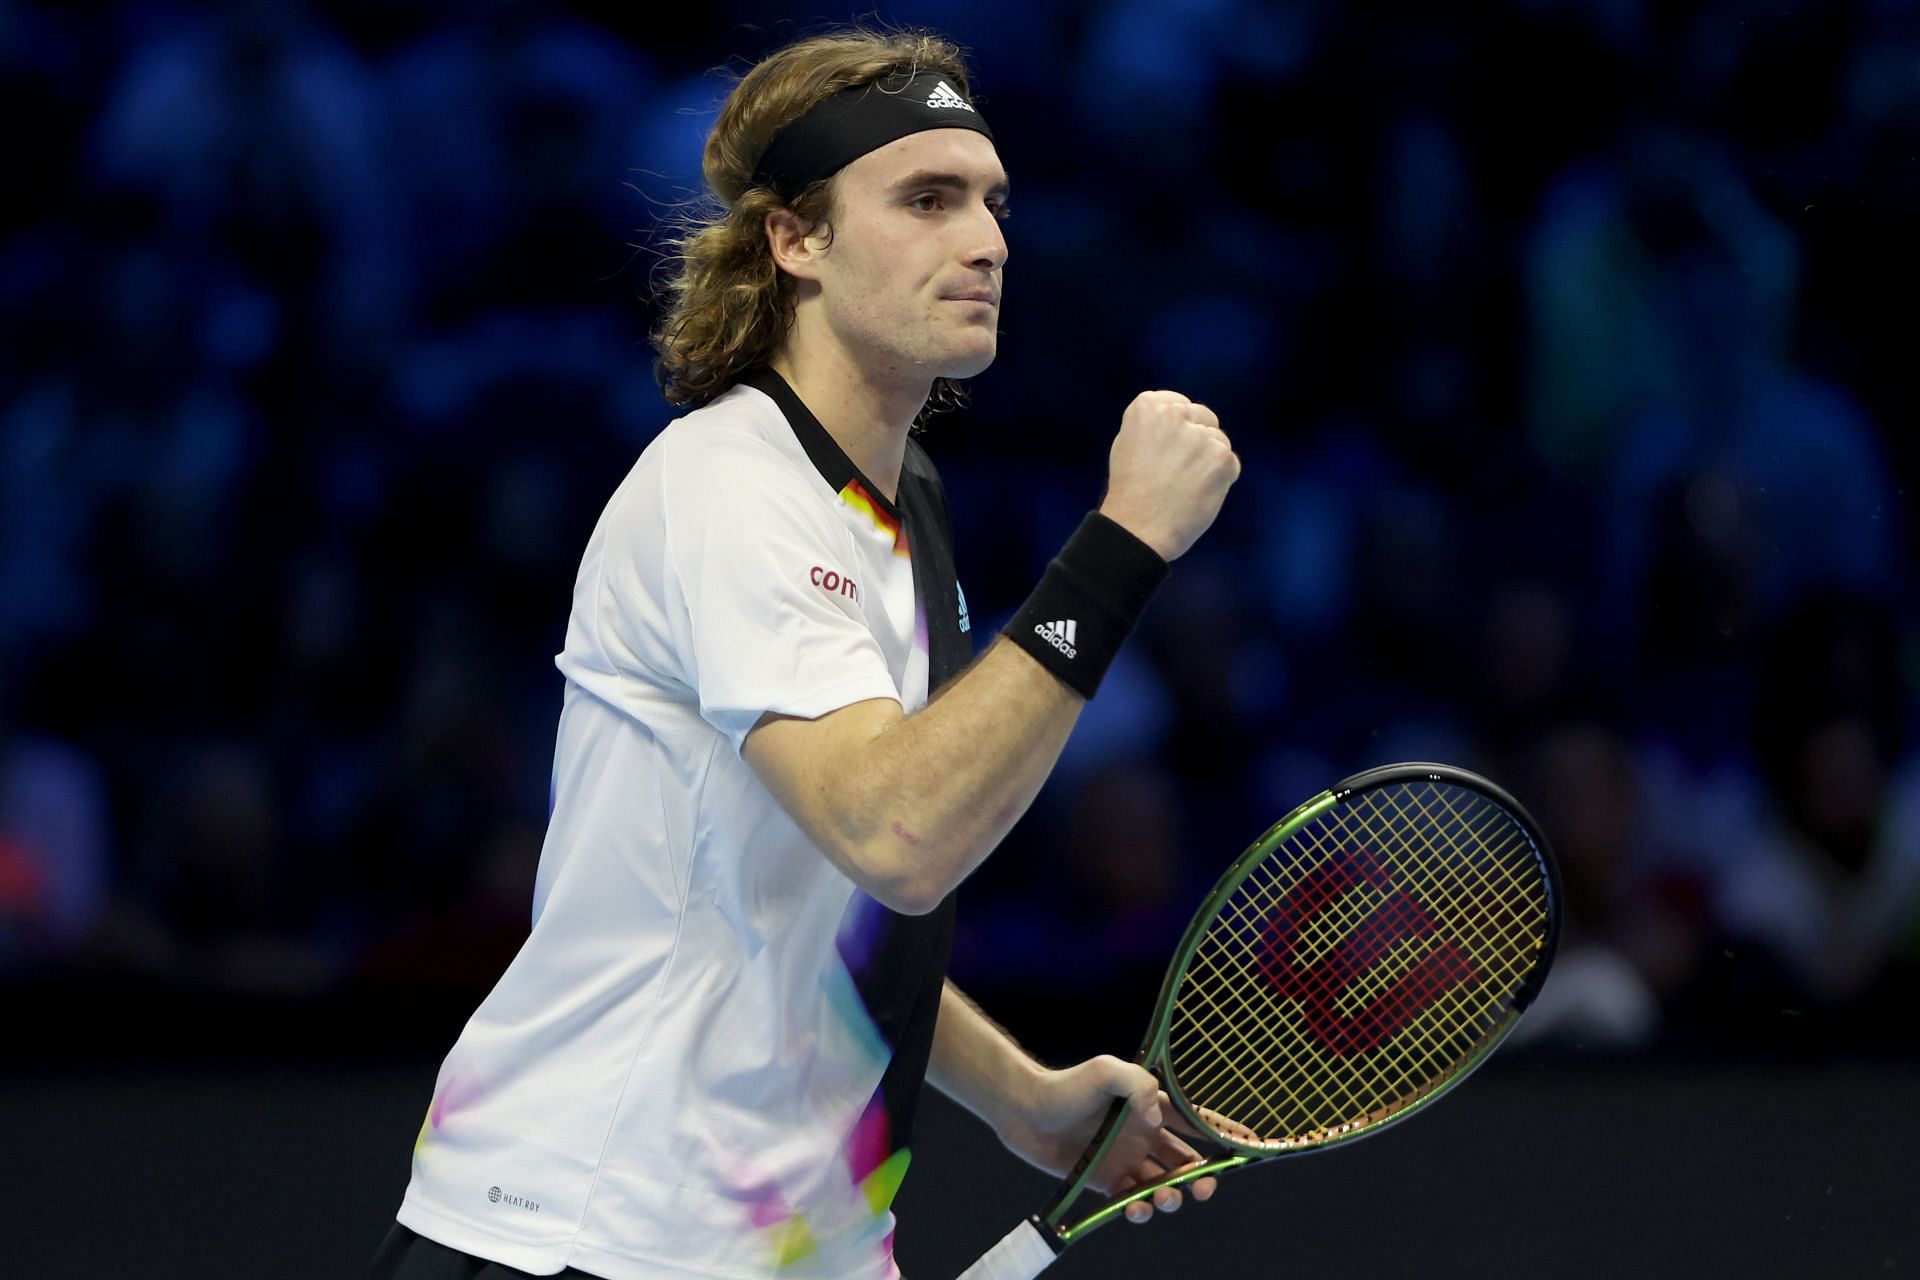 Stefanos Tsitsipas in action at the 2022 ATP Finals.